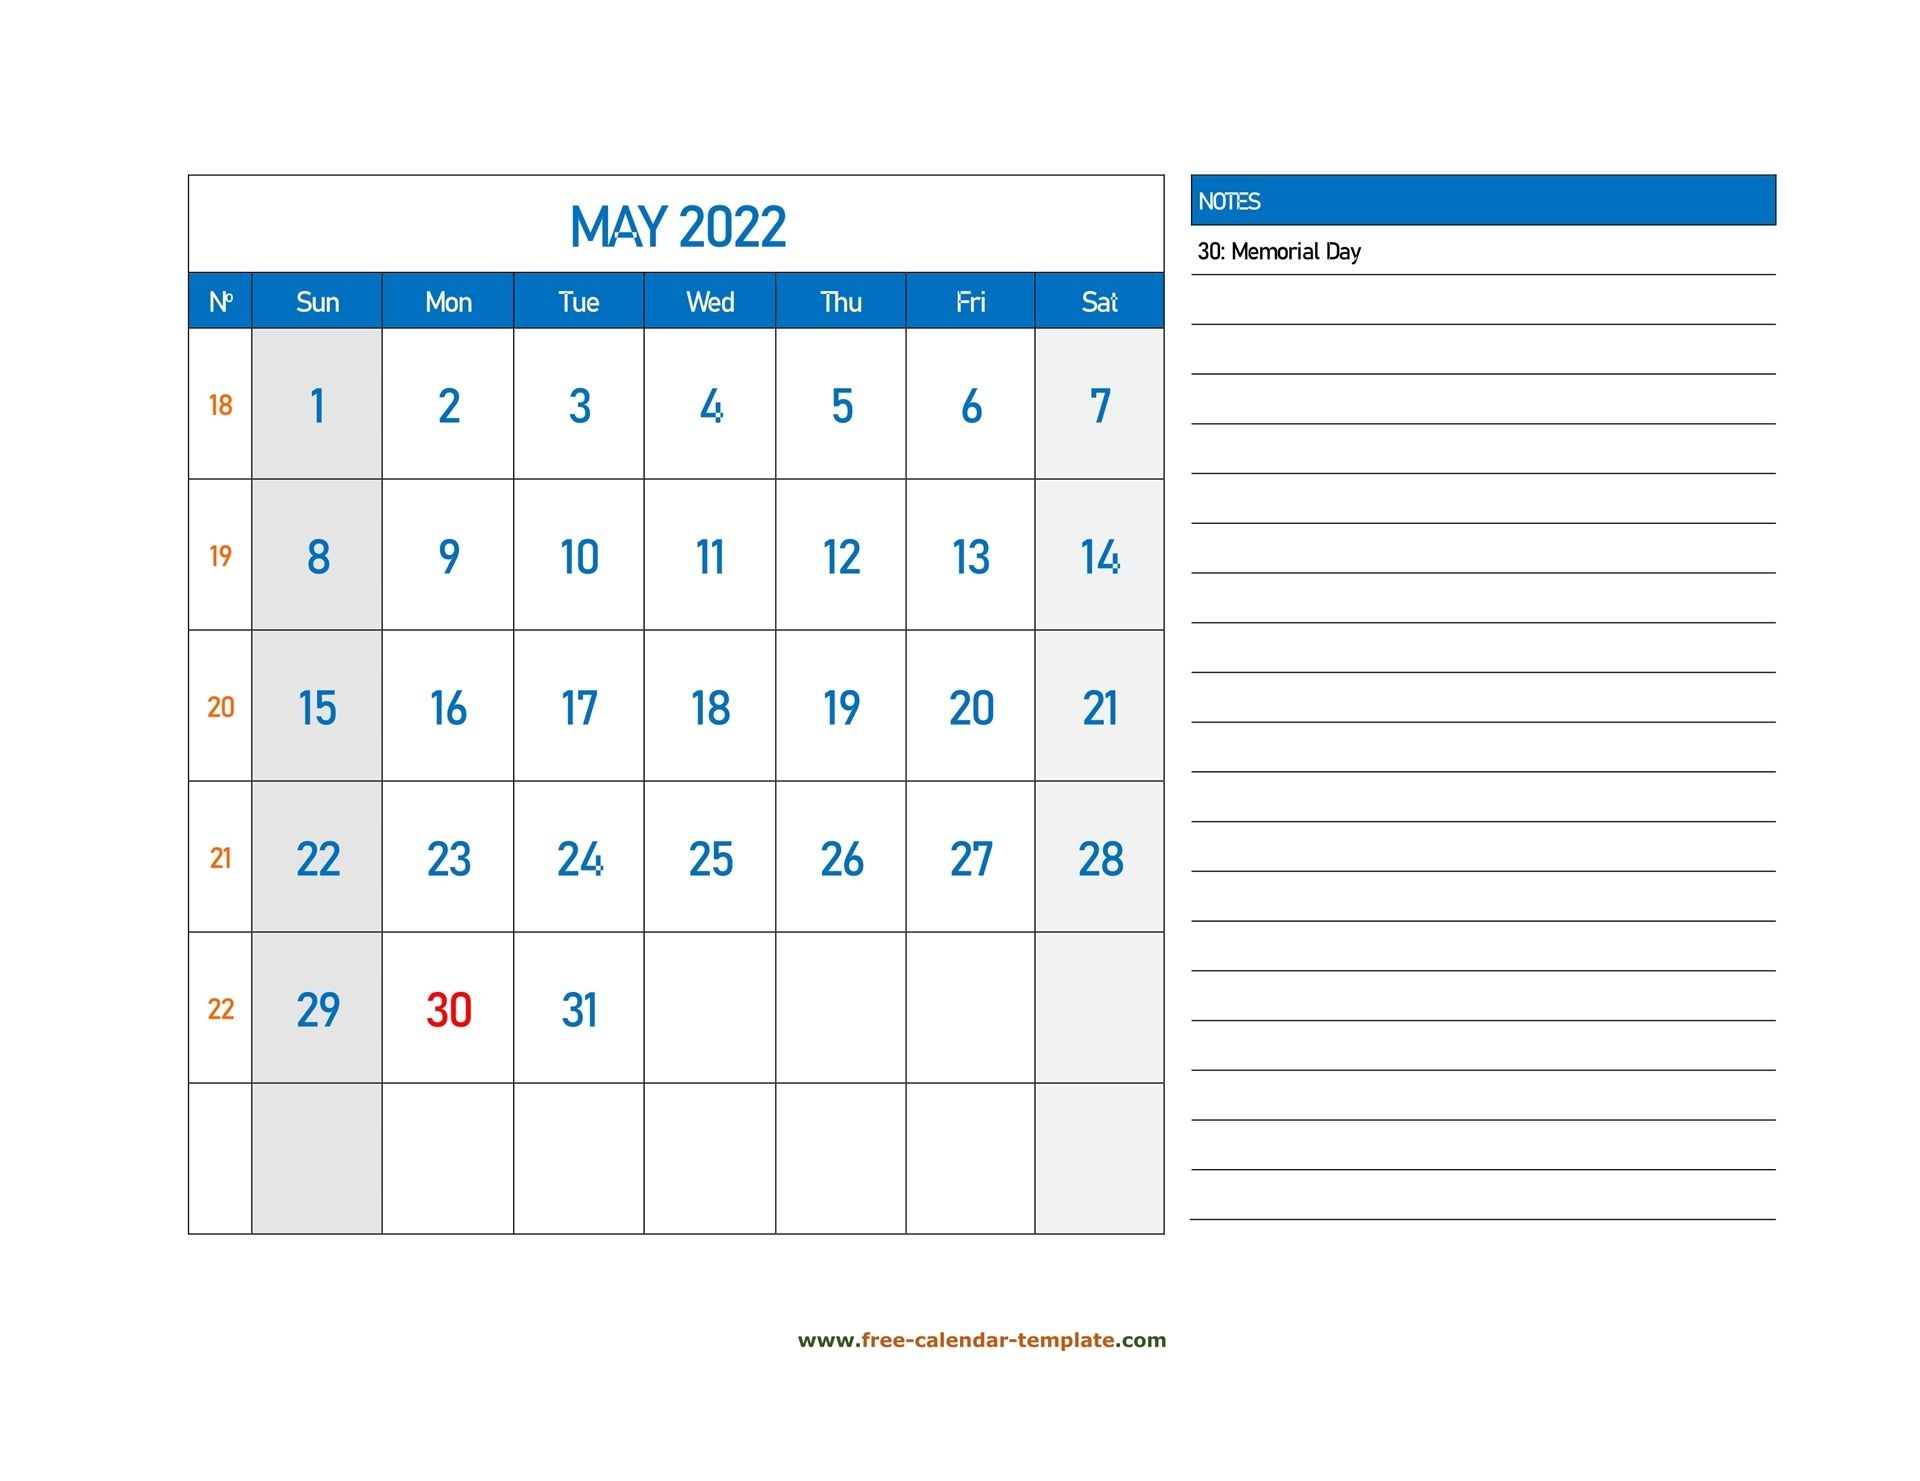 May Calendar 2022 Grid Lines For Holidays And Notes